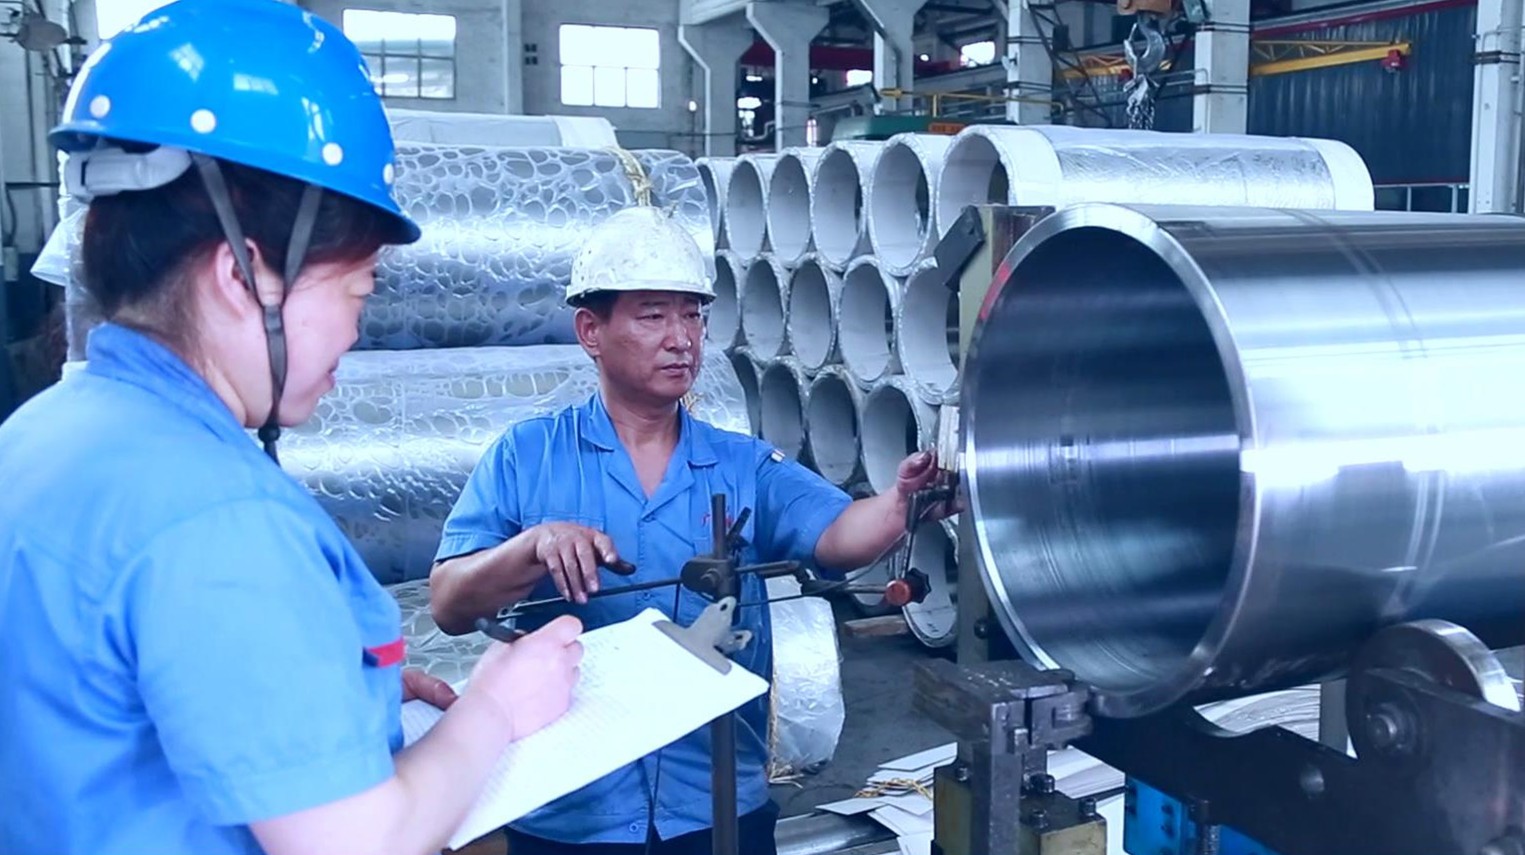 Inspected By Dynamice Balancing Test Dedicated Stainless Steel Sleeve Of Cold Mill Machine